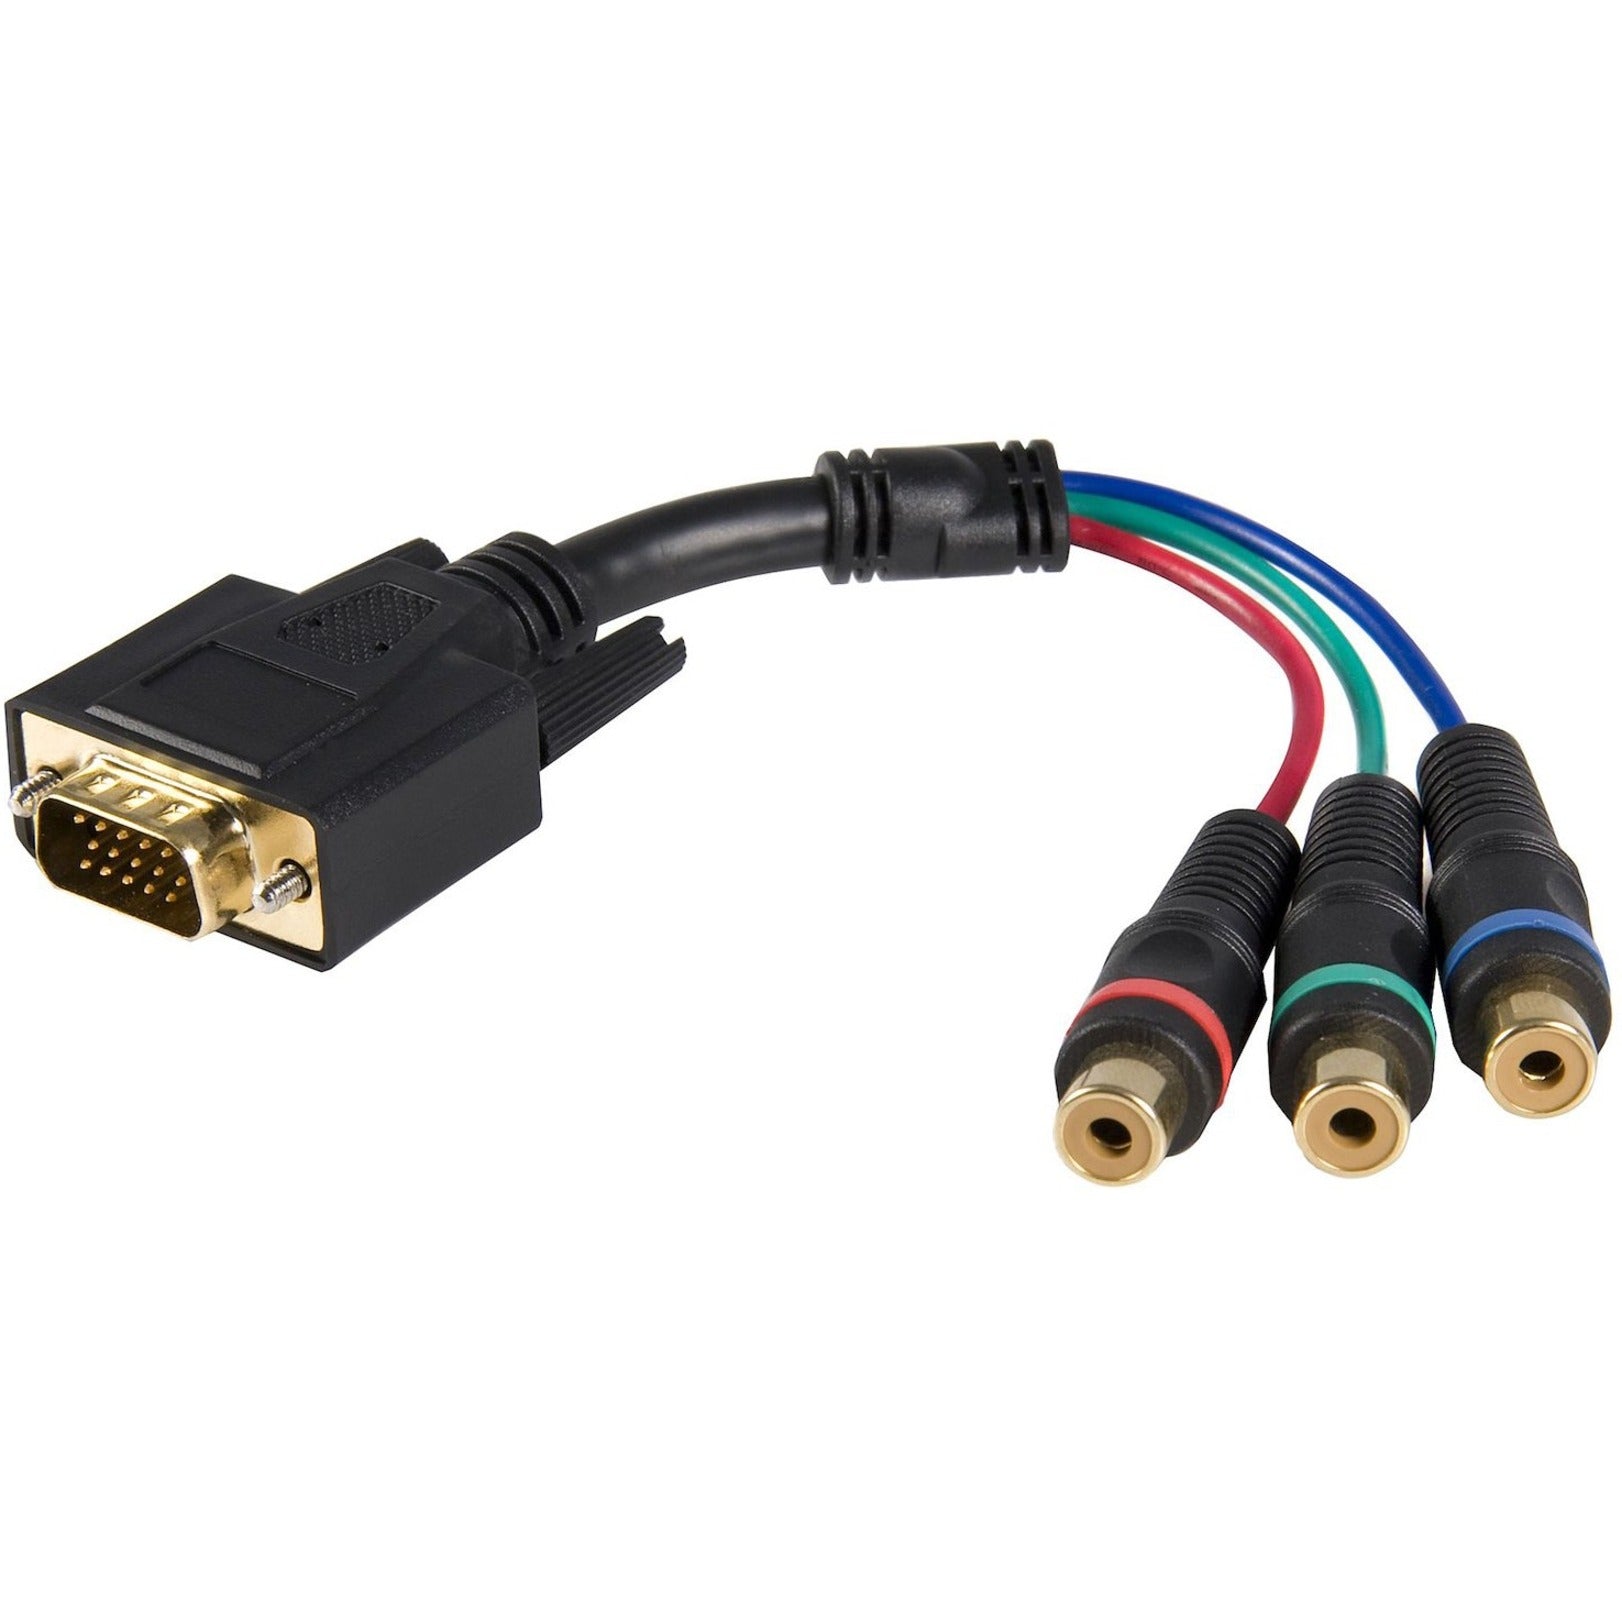 StarTech.com HD15CPNTMF HD15 to Component RCA Breakout Cable Adapter - M/F, Connect VGA to RCA Video